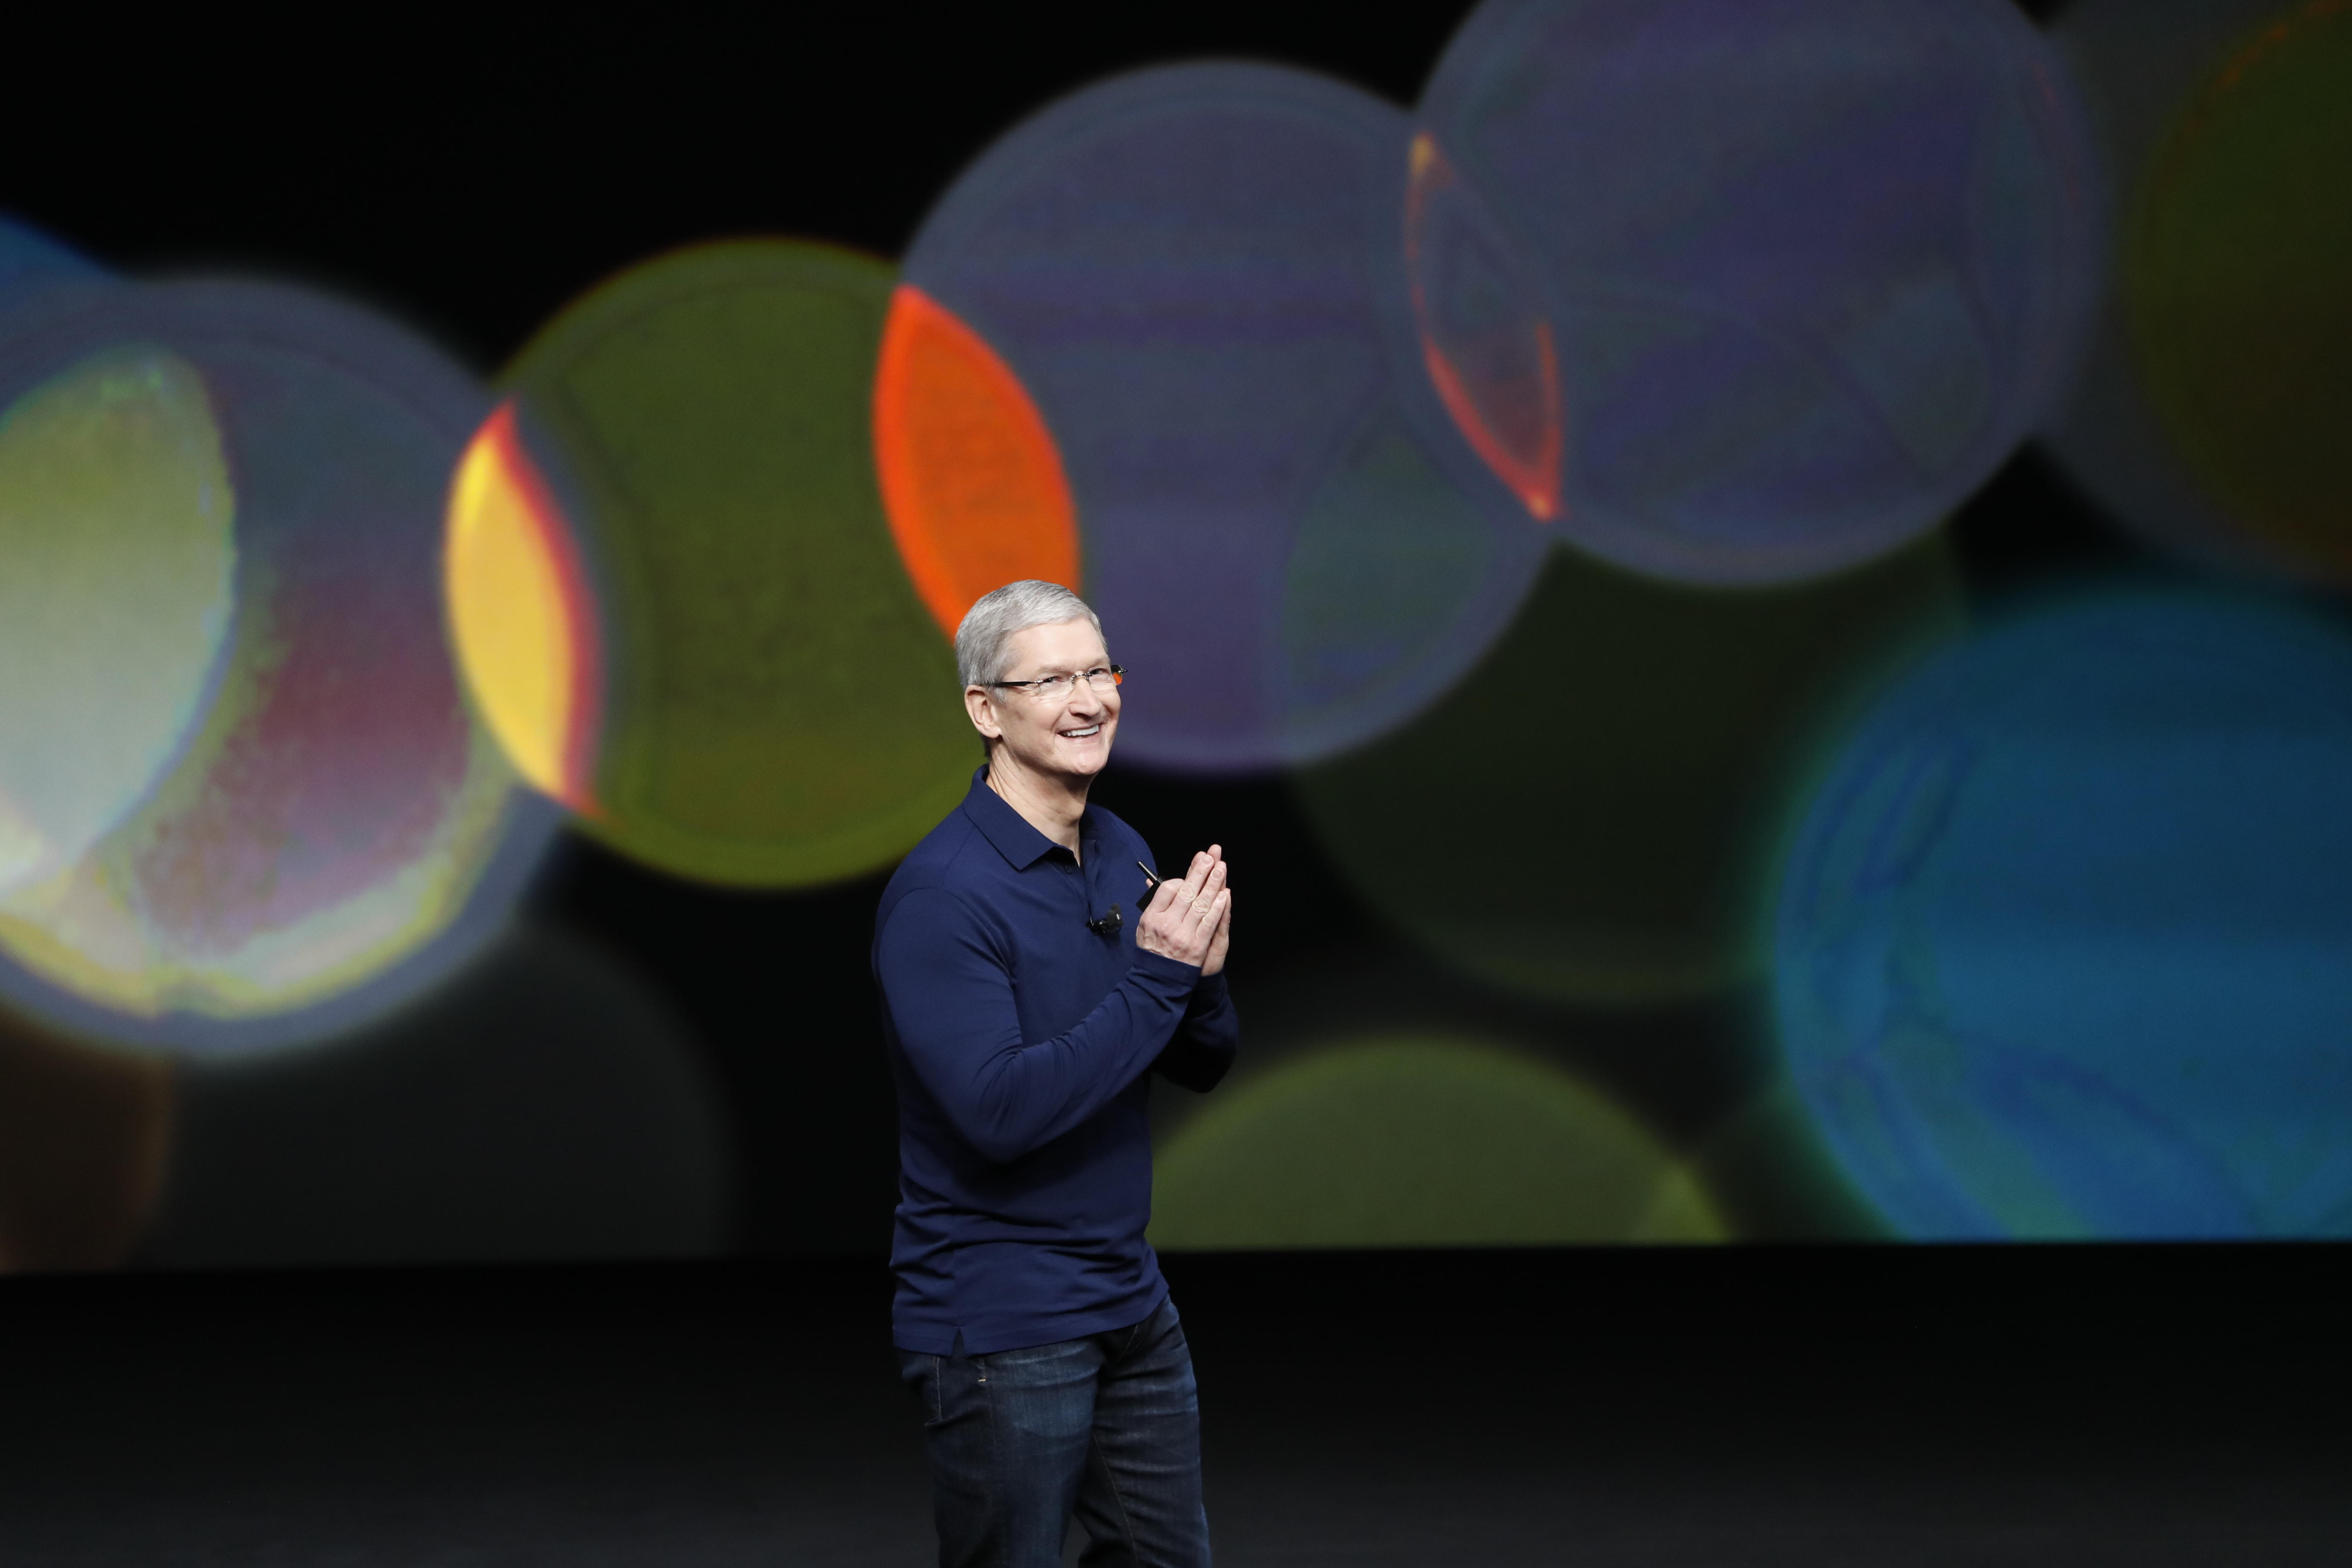 Are Apple and its ilk struggling to innovate? - CBS News